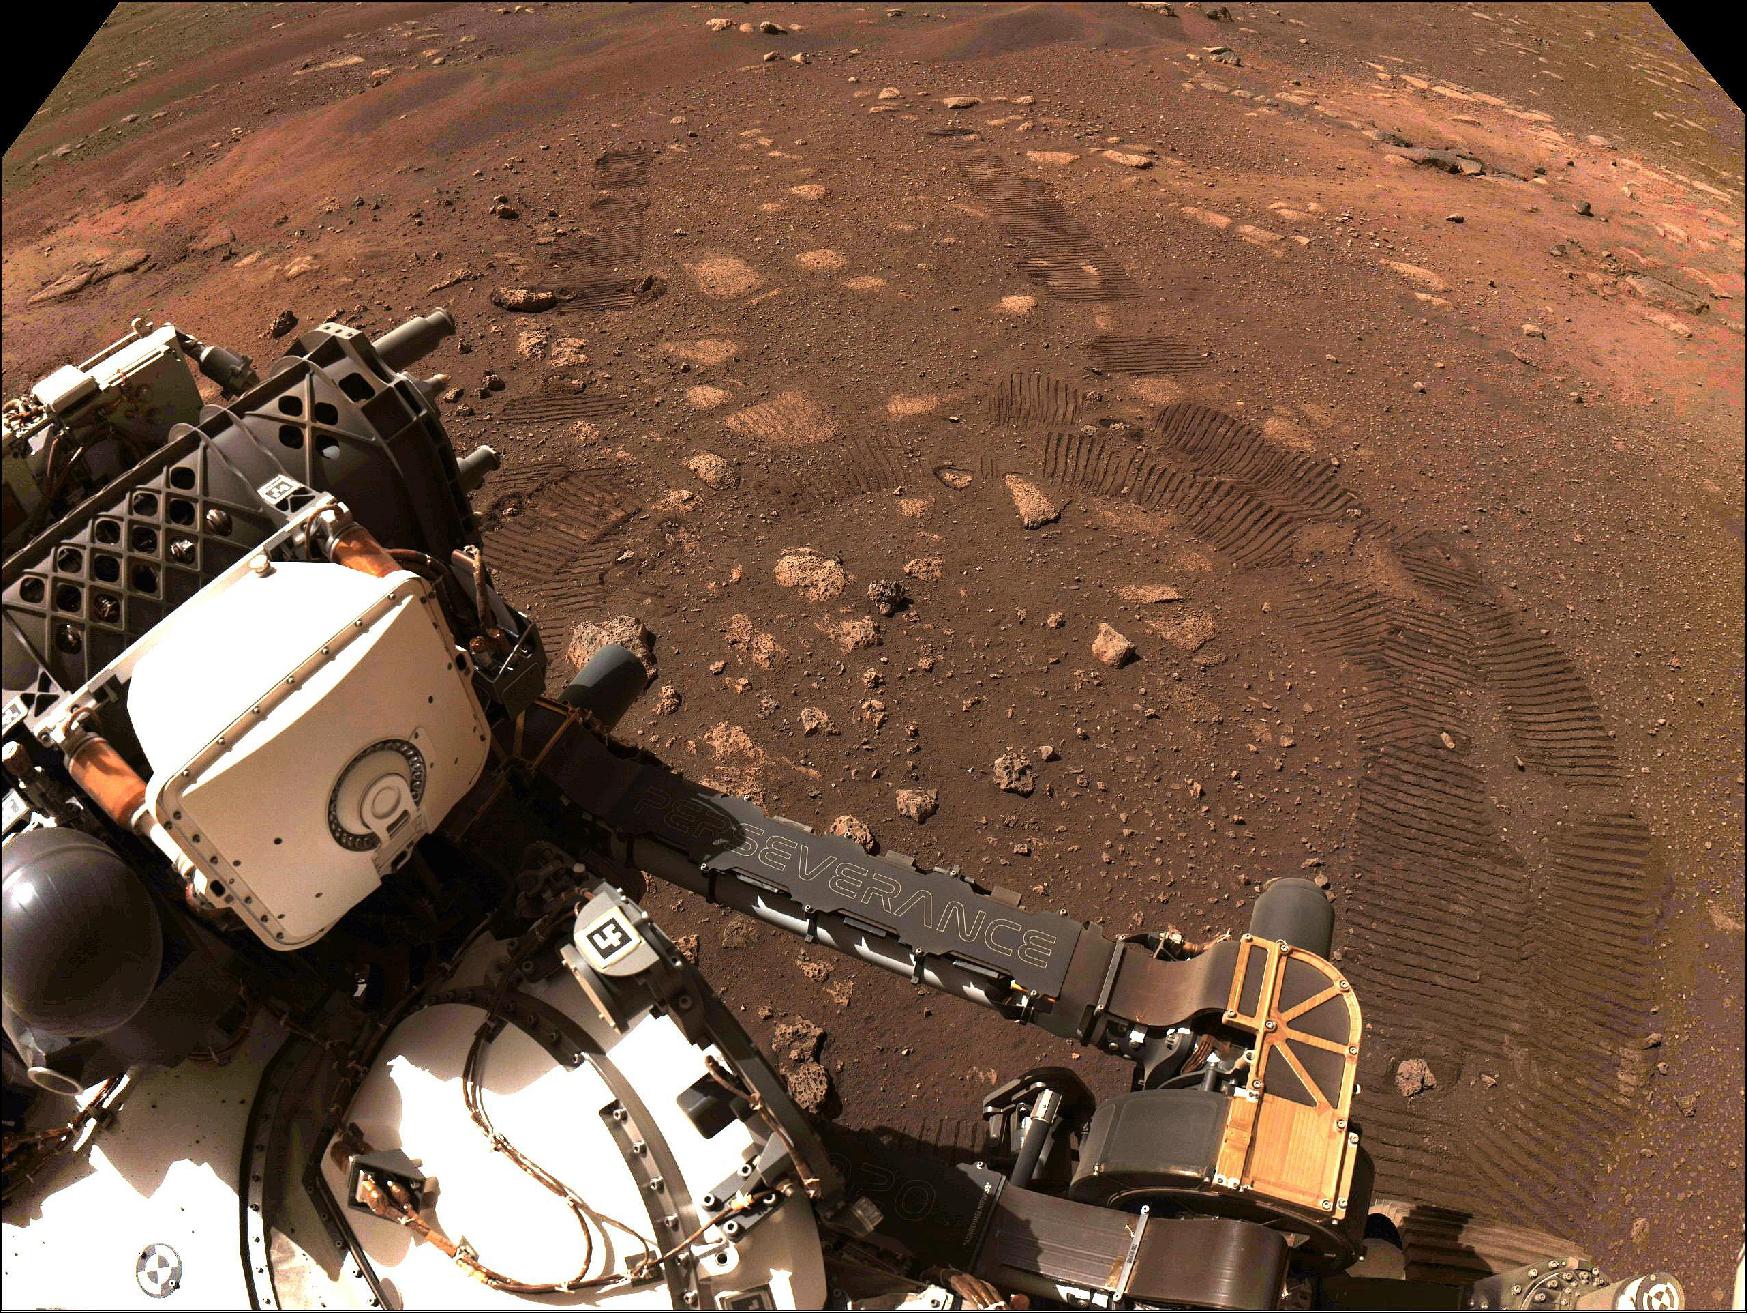 Figure 40: This image was taken during the first drive of NASA's Perseverance rover on Mars on March 4, 2021. This image was taken by the rover's Navigation Cameras (image credit: NASA/JPL-Caltech)